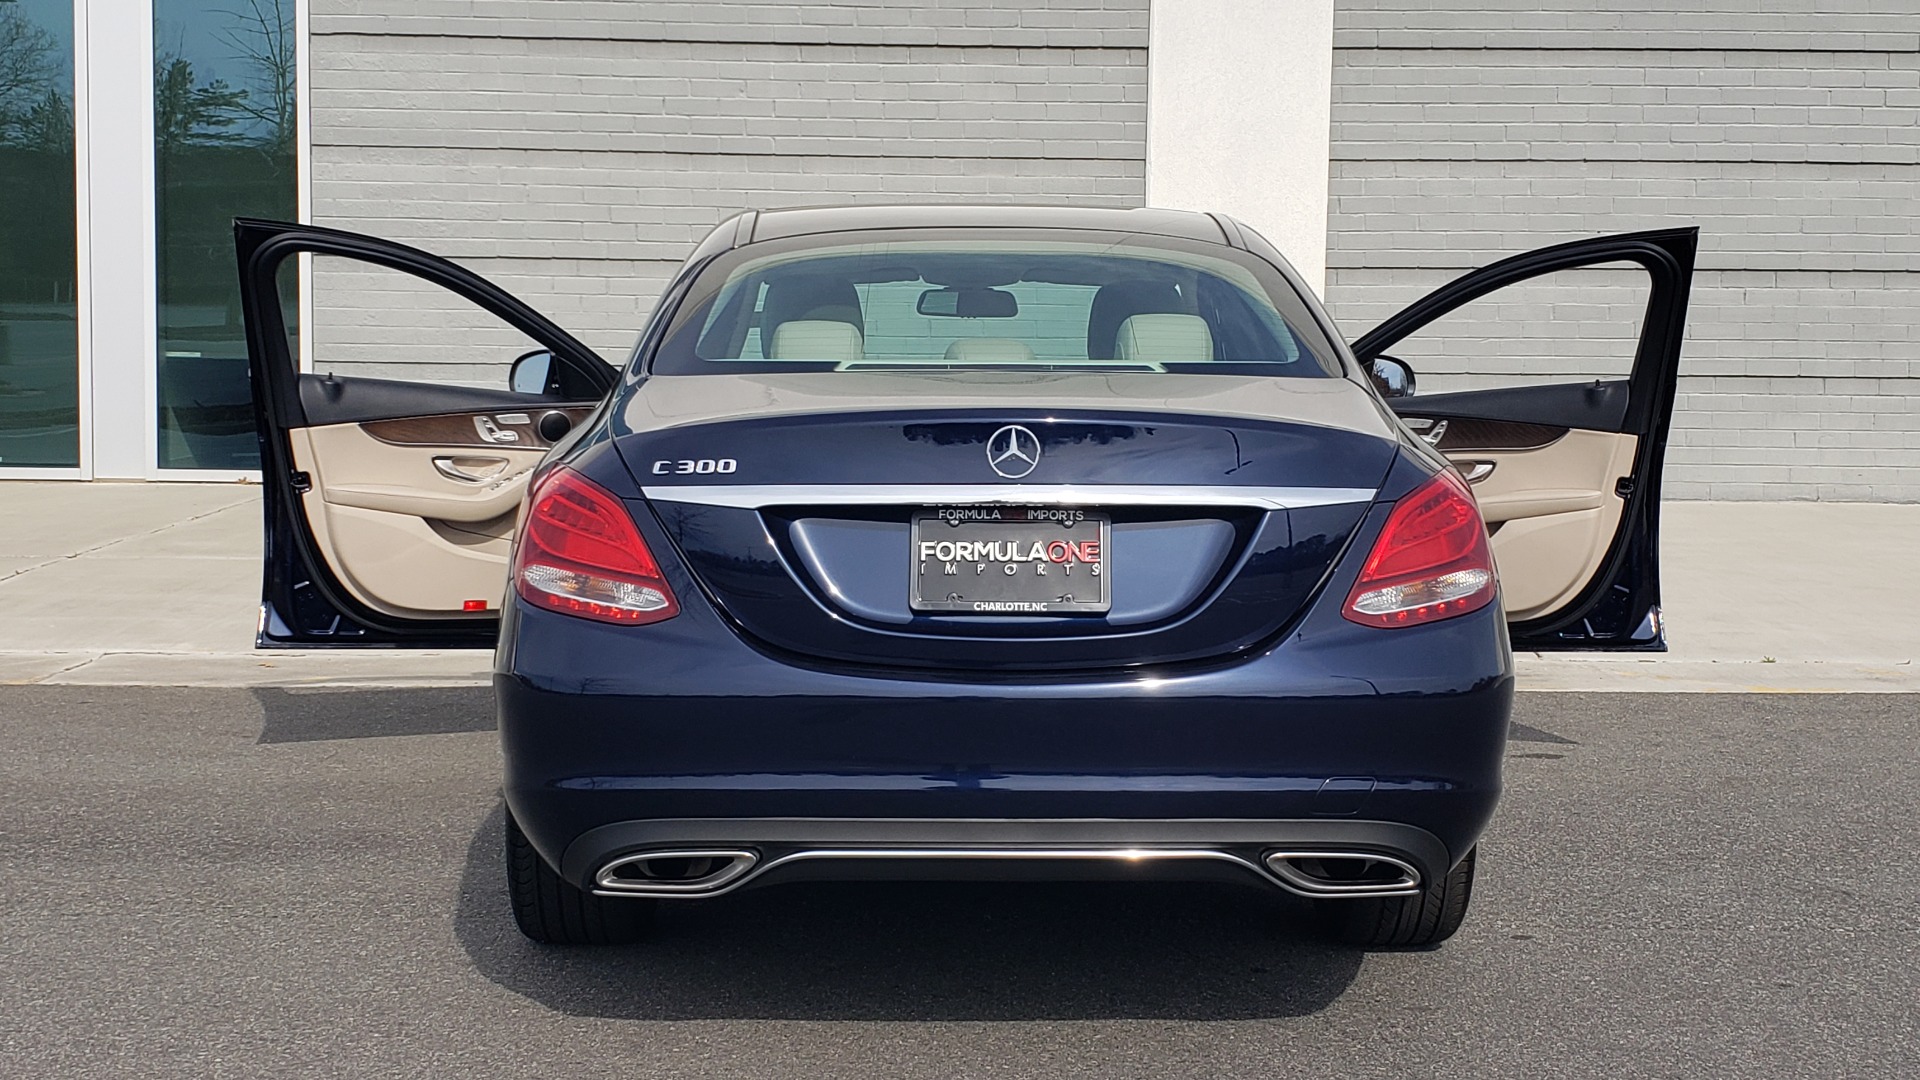 Used 2018 Mercedes-Benz C-CLASS C 300 PREMIUM / PANO-ROOF / HTD STST / APPL CARPLAY / REARVIEW for sale Sold at Formula Imports in Charlotte NC 28227 24